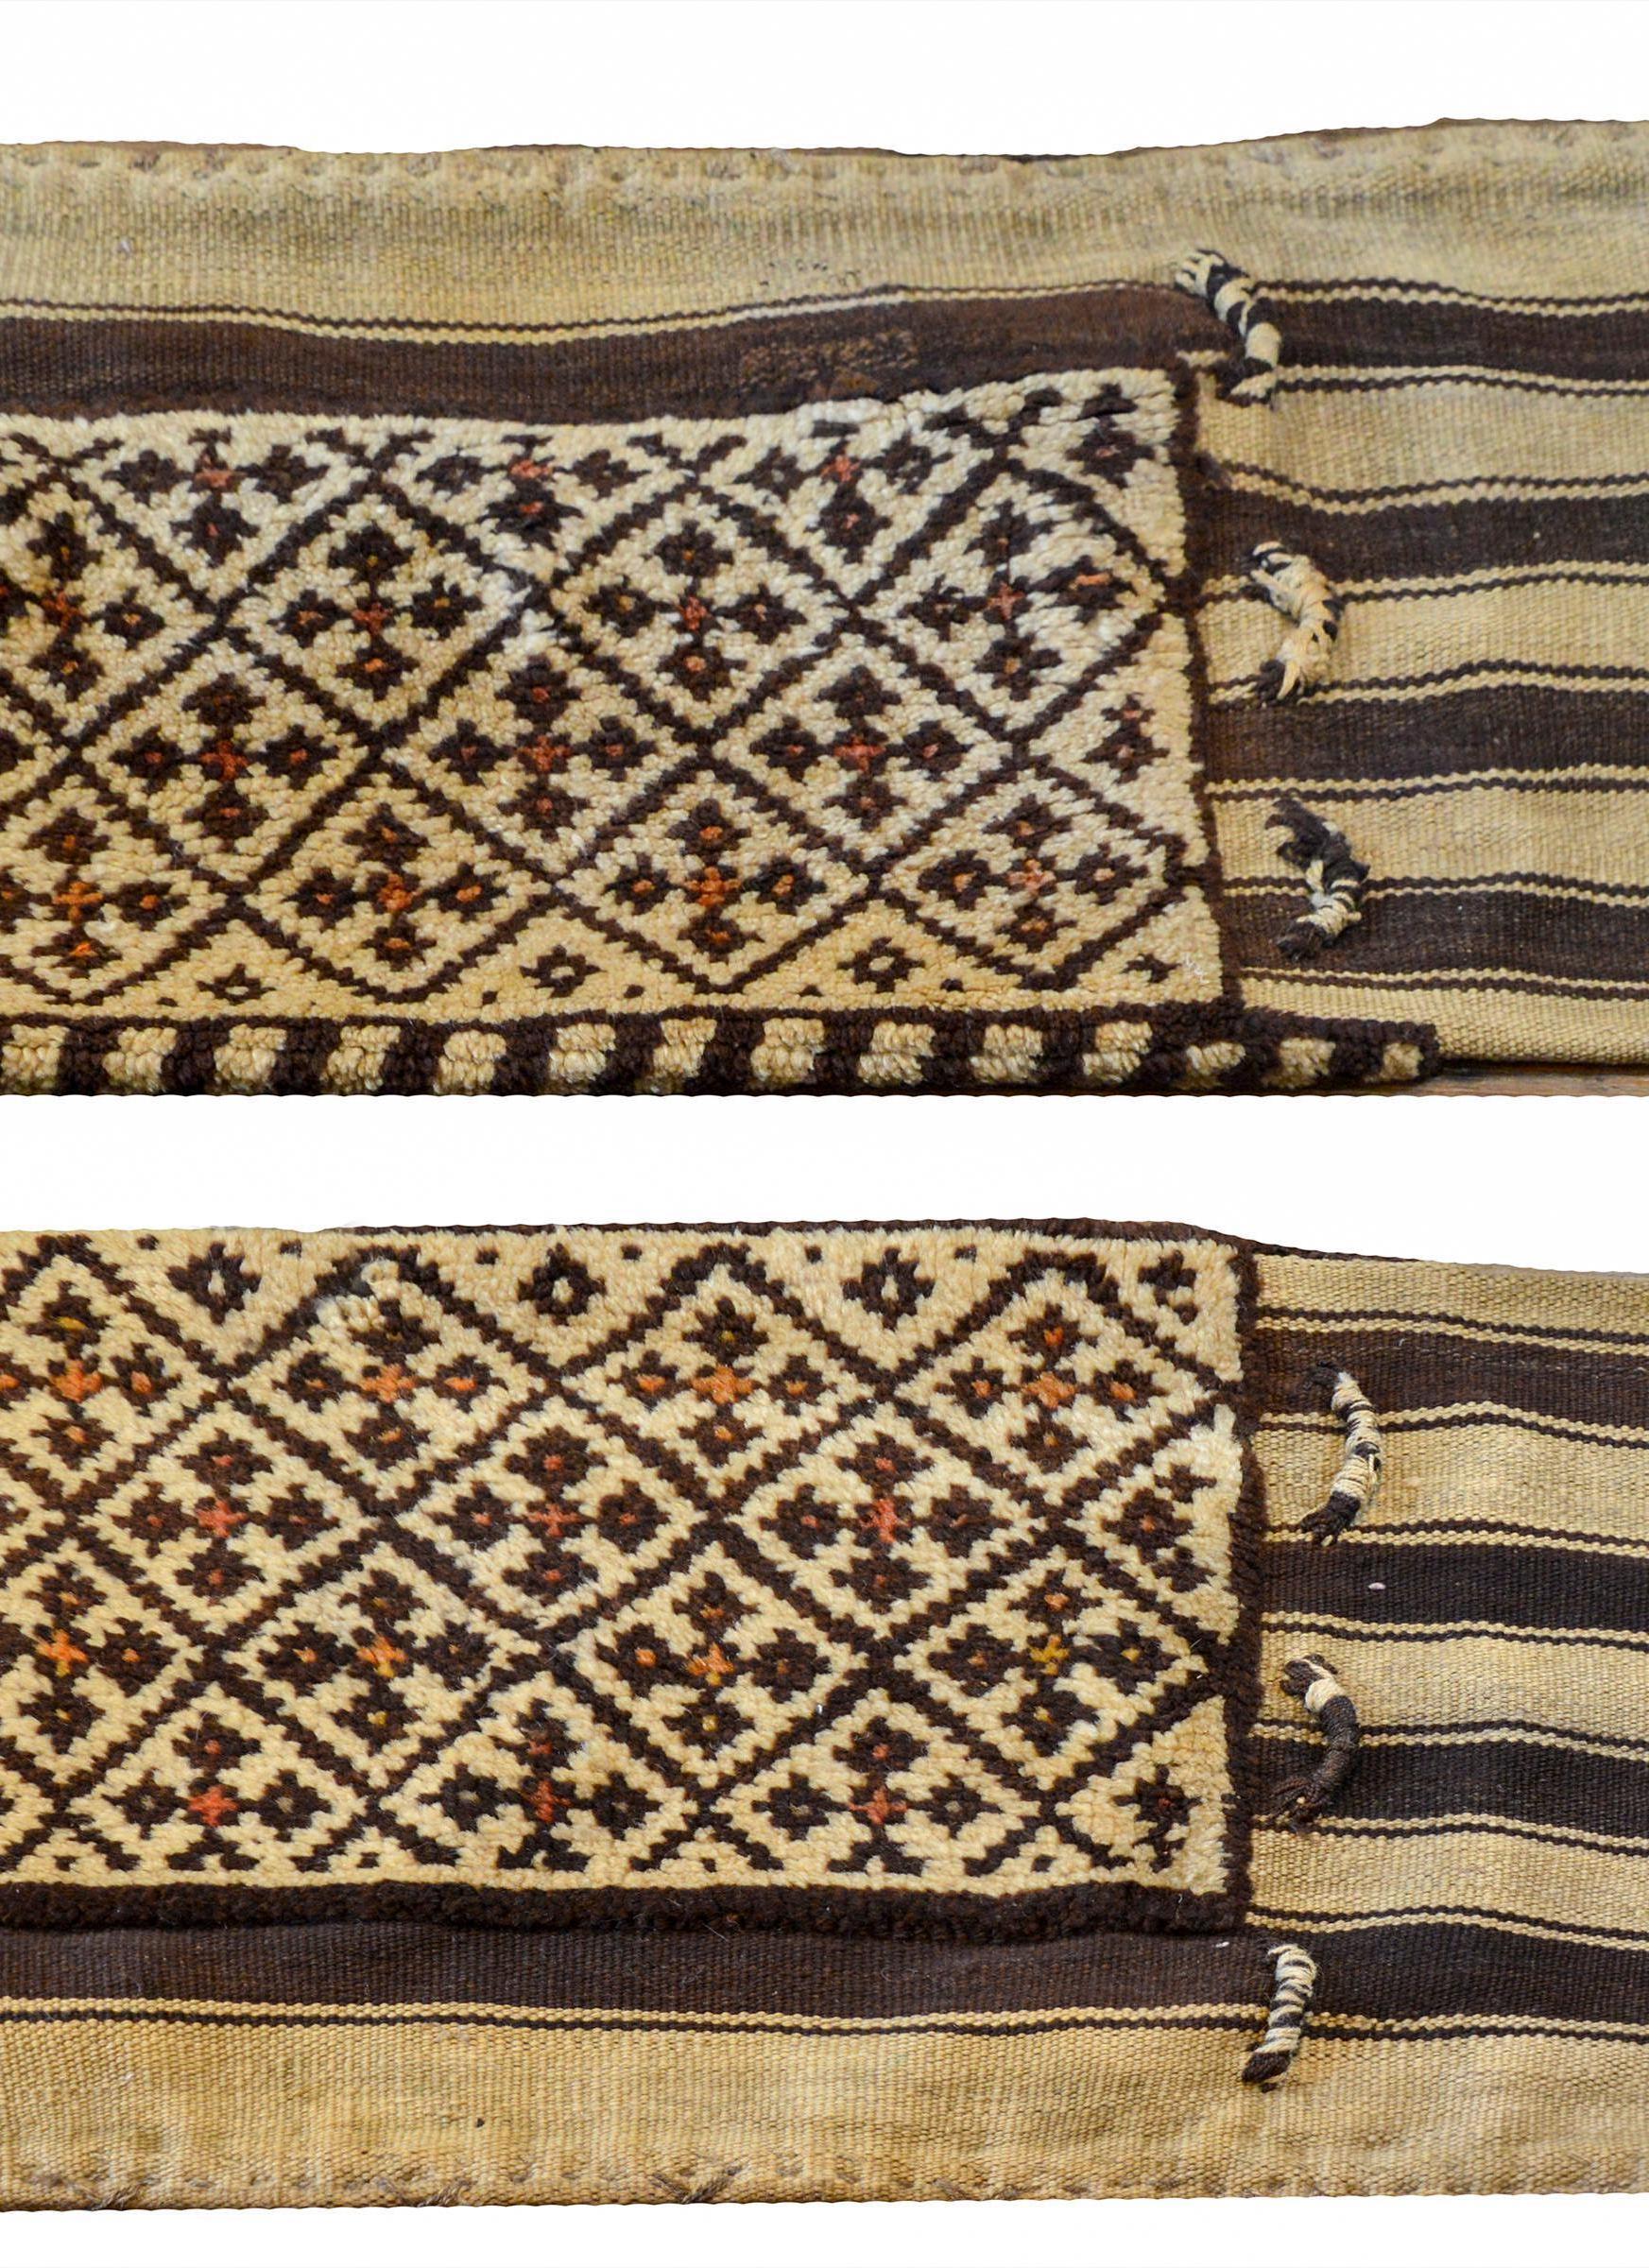 A fantastic pair of early 20th century Persian Gabbeh grain bags, each with a cross pattern woven in brown and white wool with orange details. The backs are flat-weave with brown and white stripes.